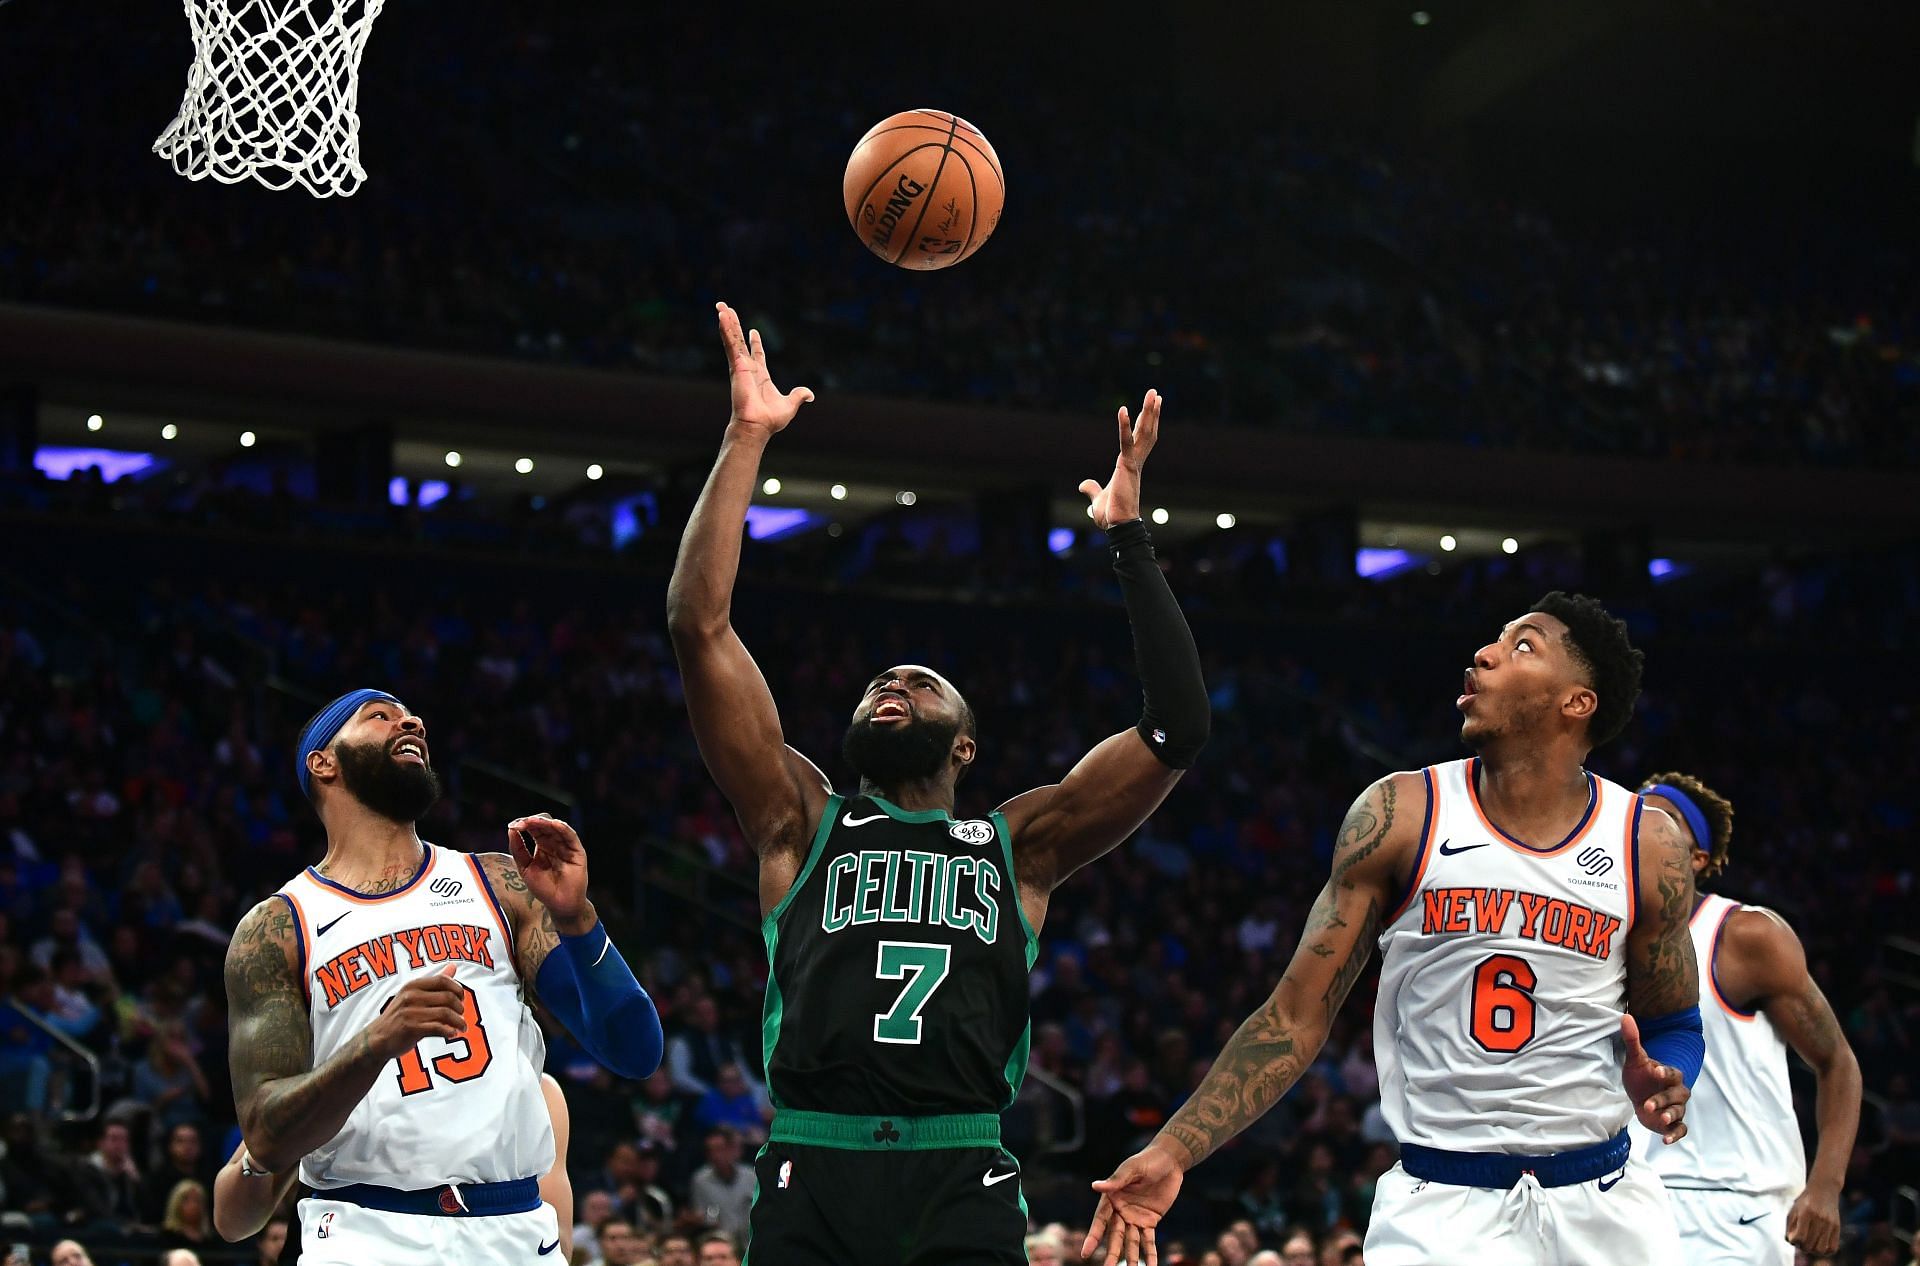 Jaylen Brown was sizzling hot for the Boston Celtics against the New York Knicks after being cleared from health and safety protocols just a day before tip-off.